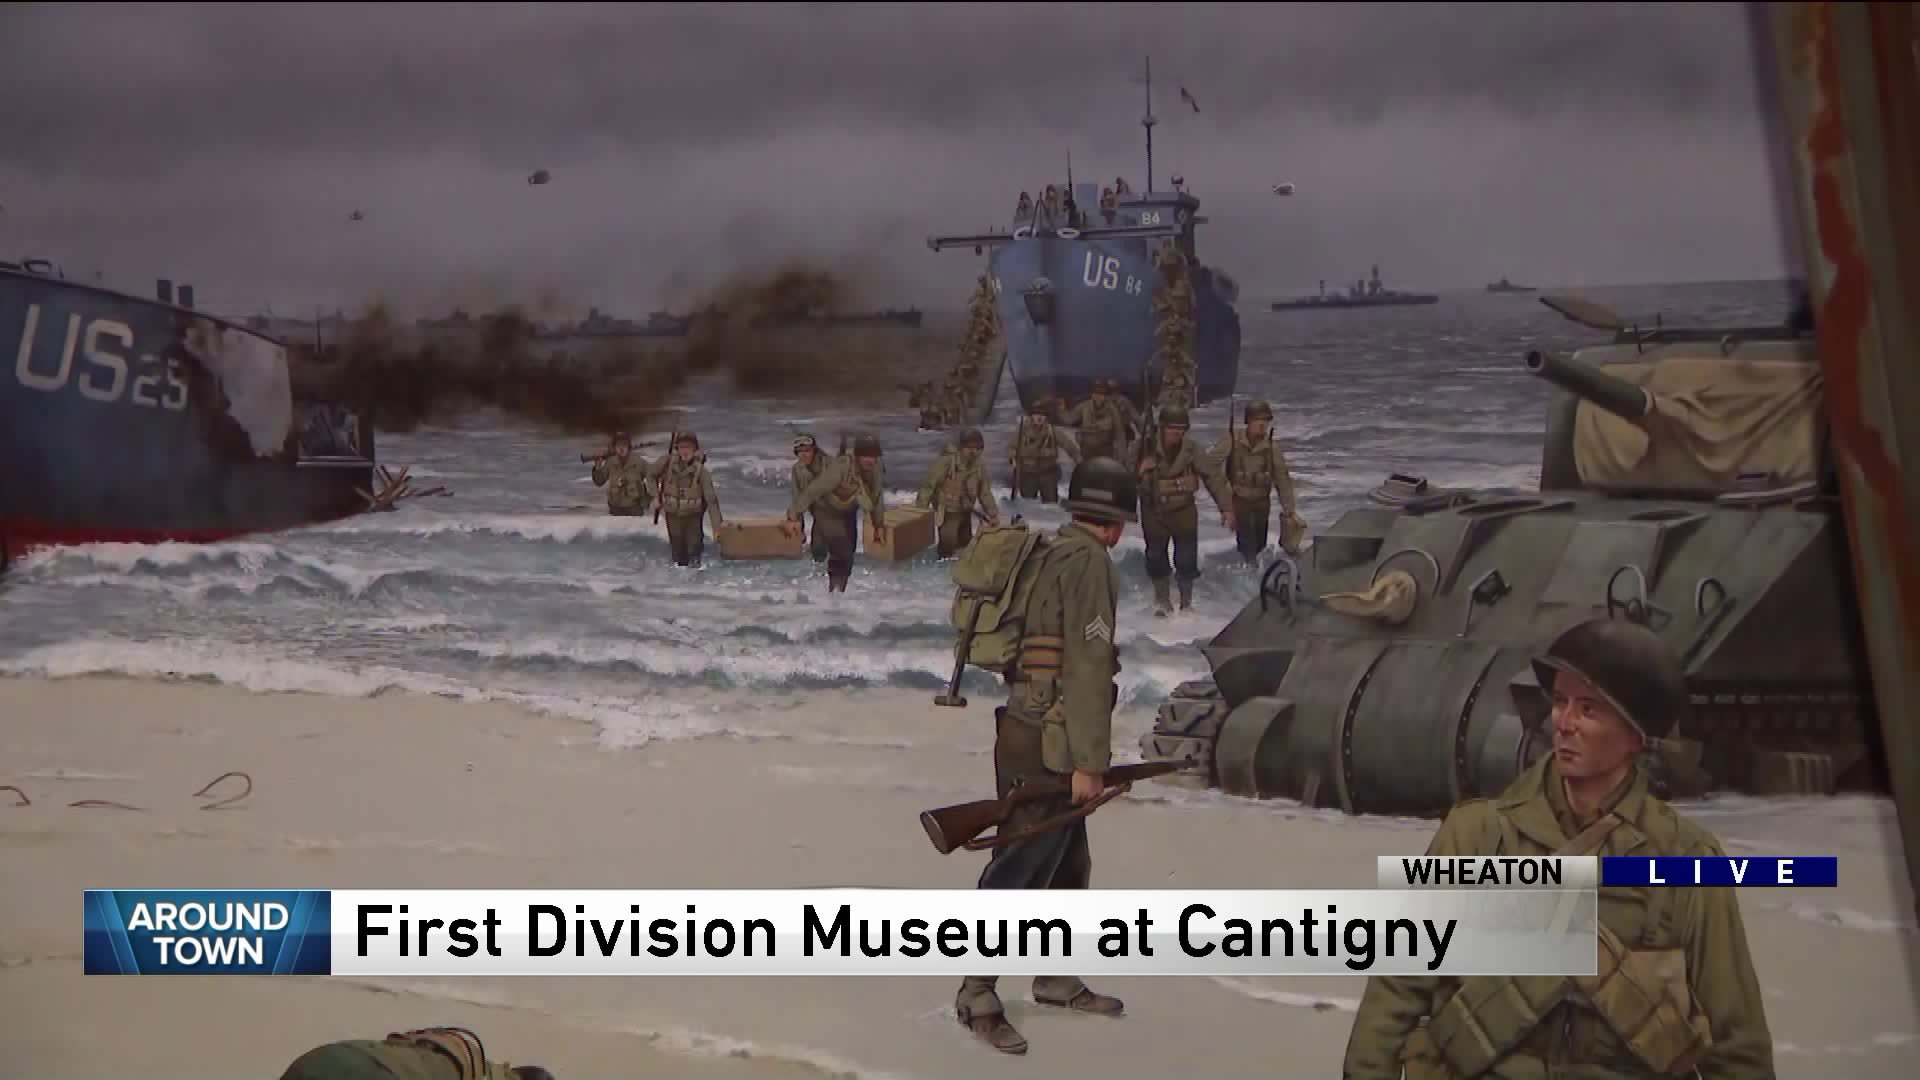 Around Town visits the First Division Museum at Cantigny Park